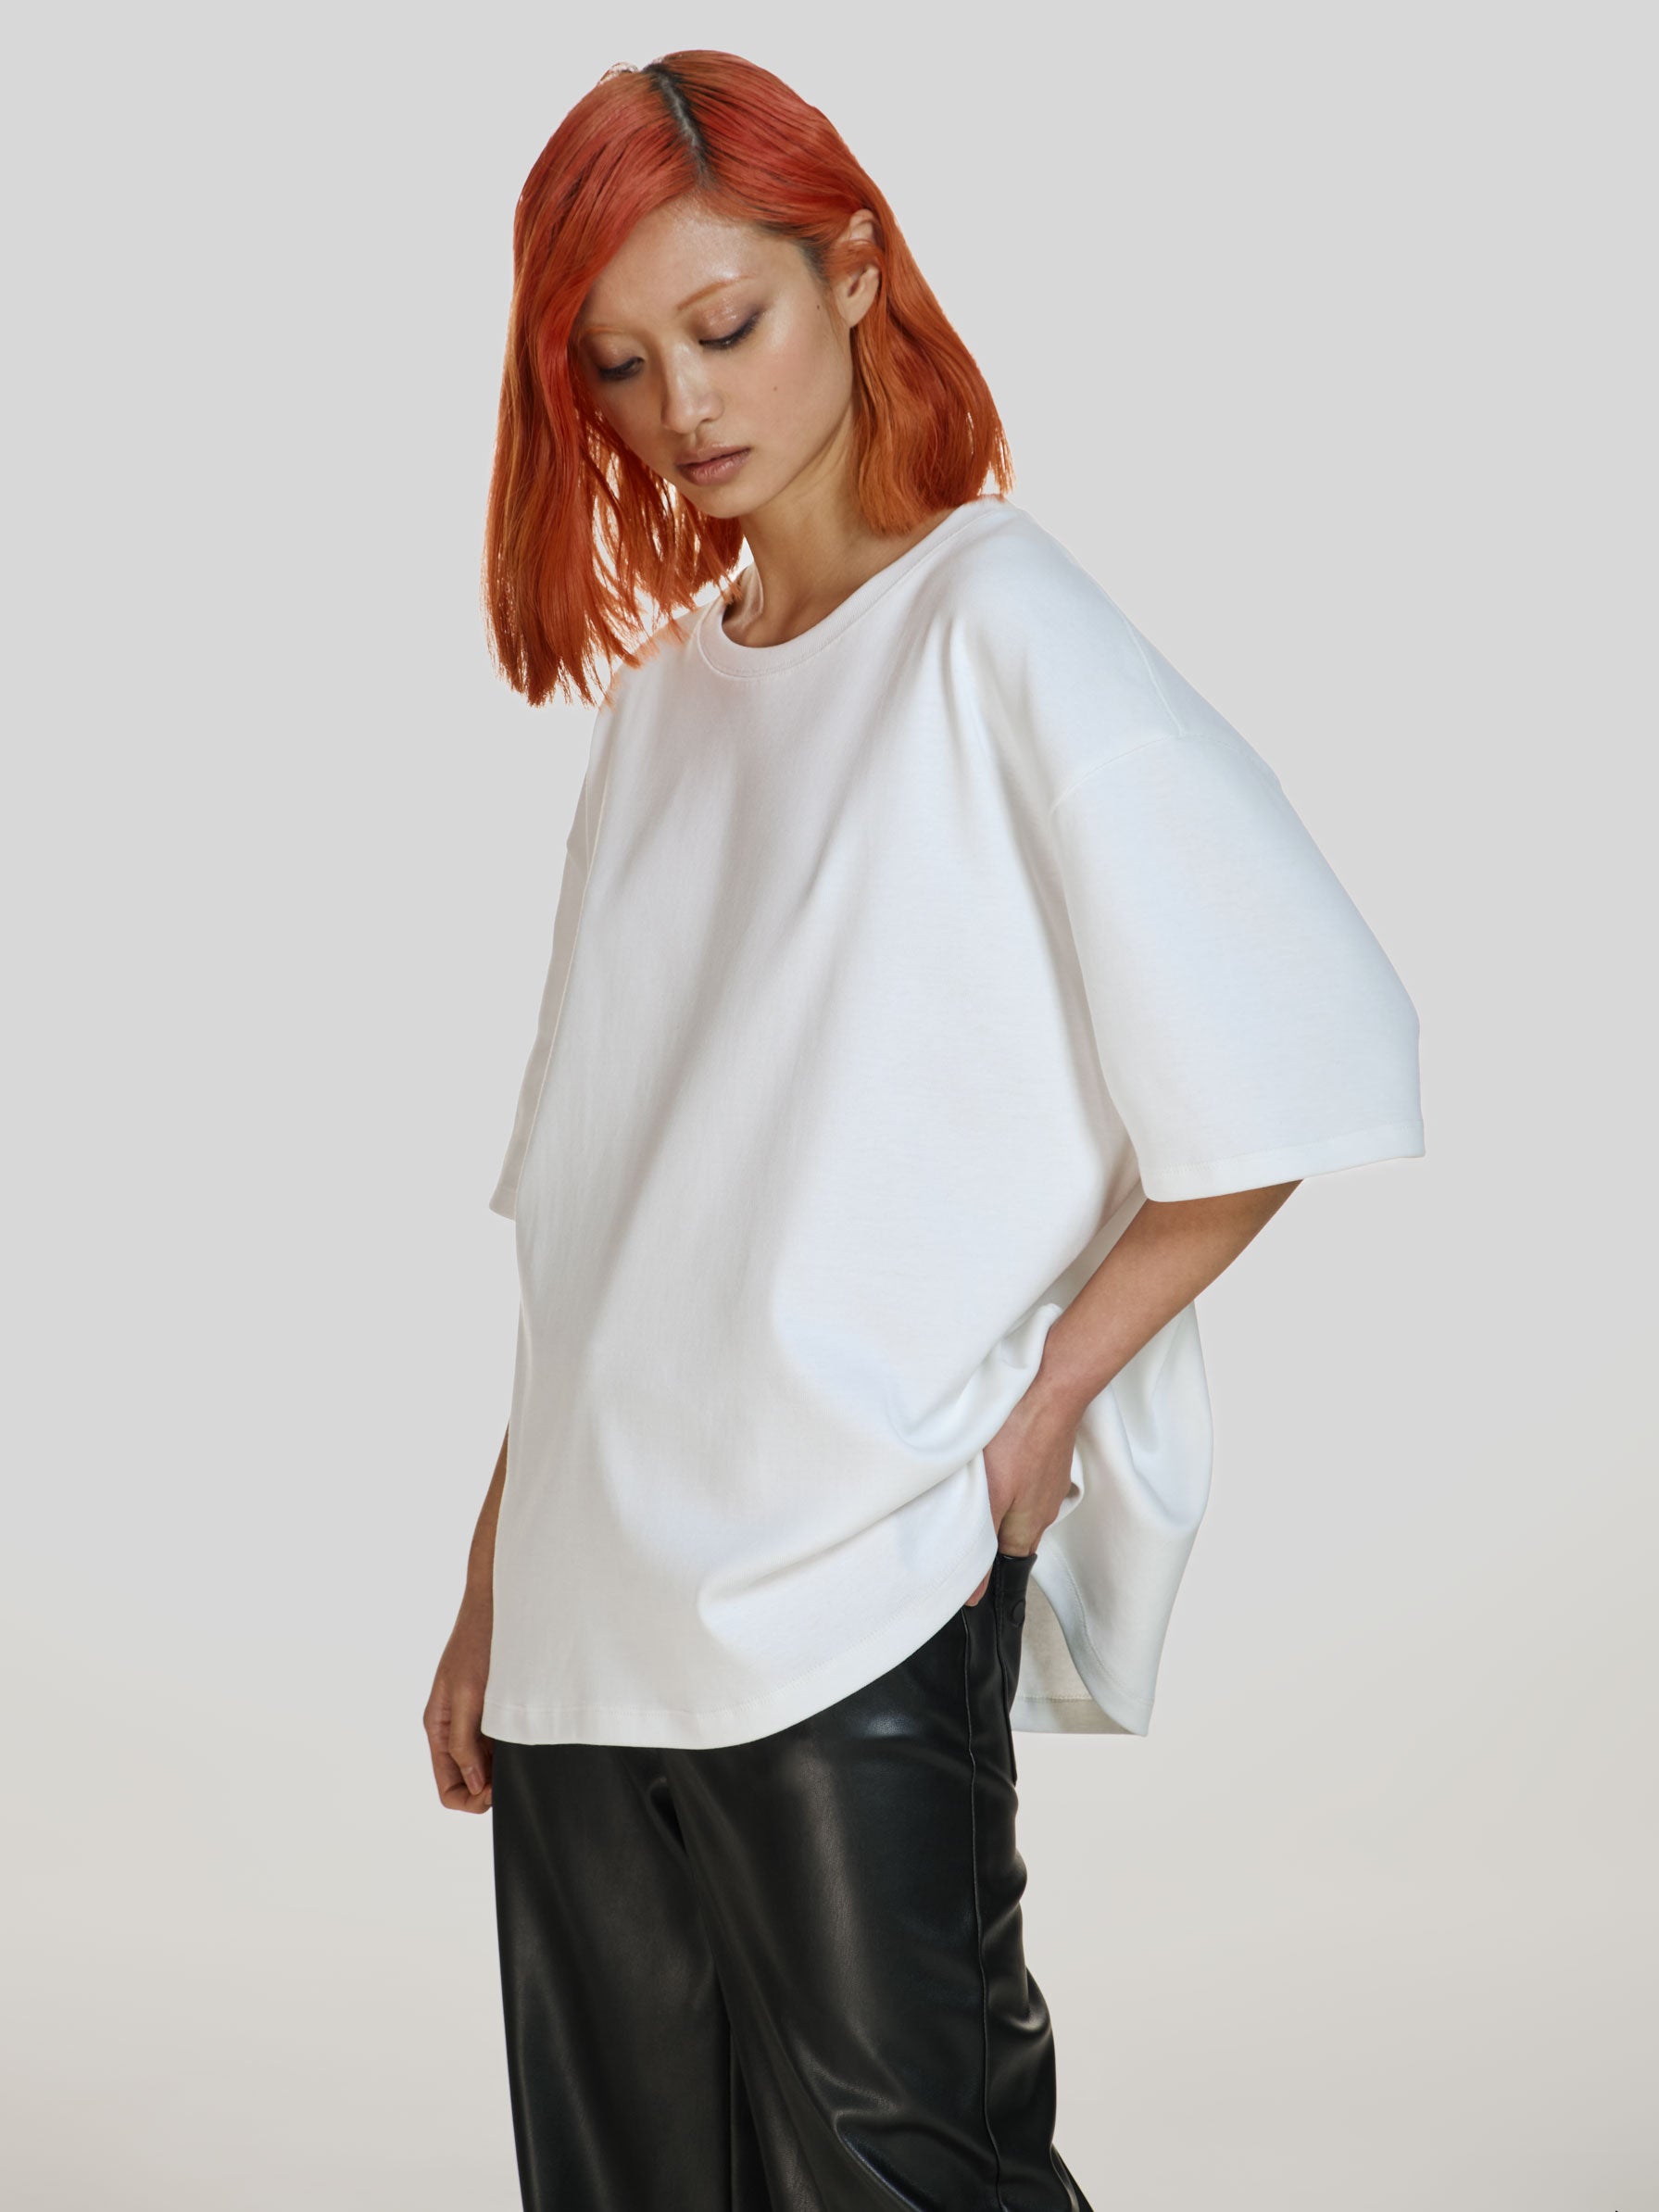 Medium full shot of a girl in a white cotton oversized t-shirt and black vegan leather straight leg pants